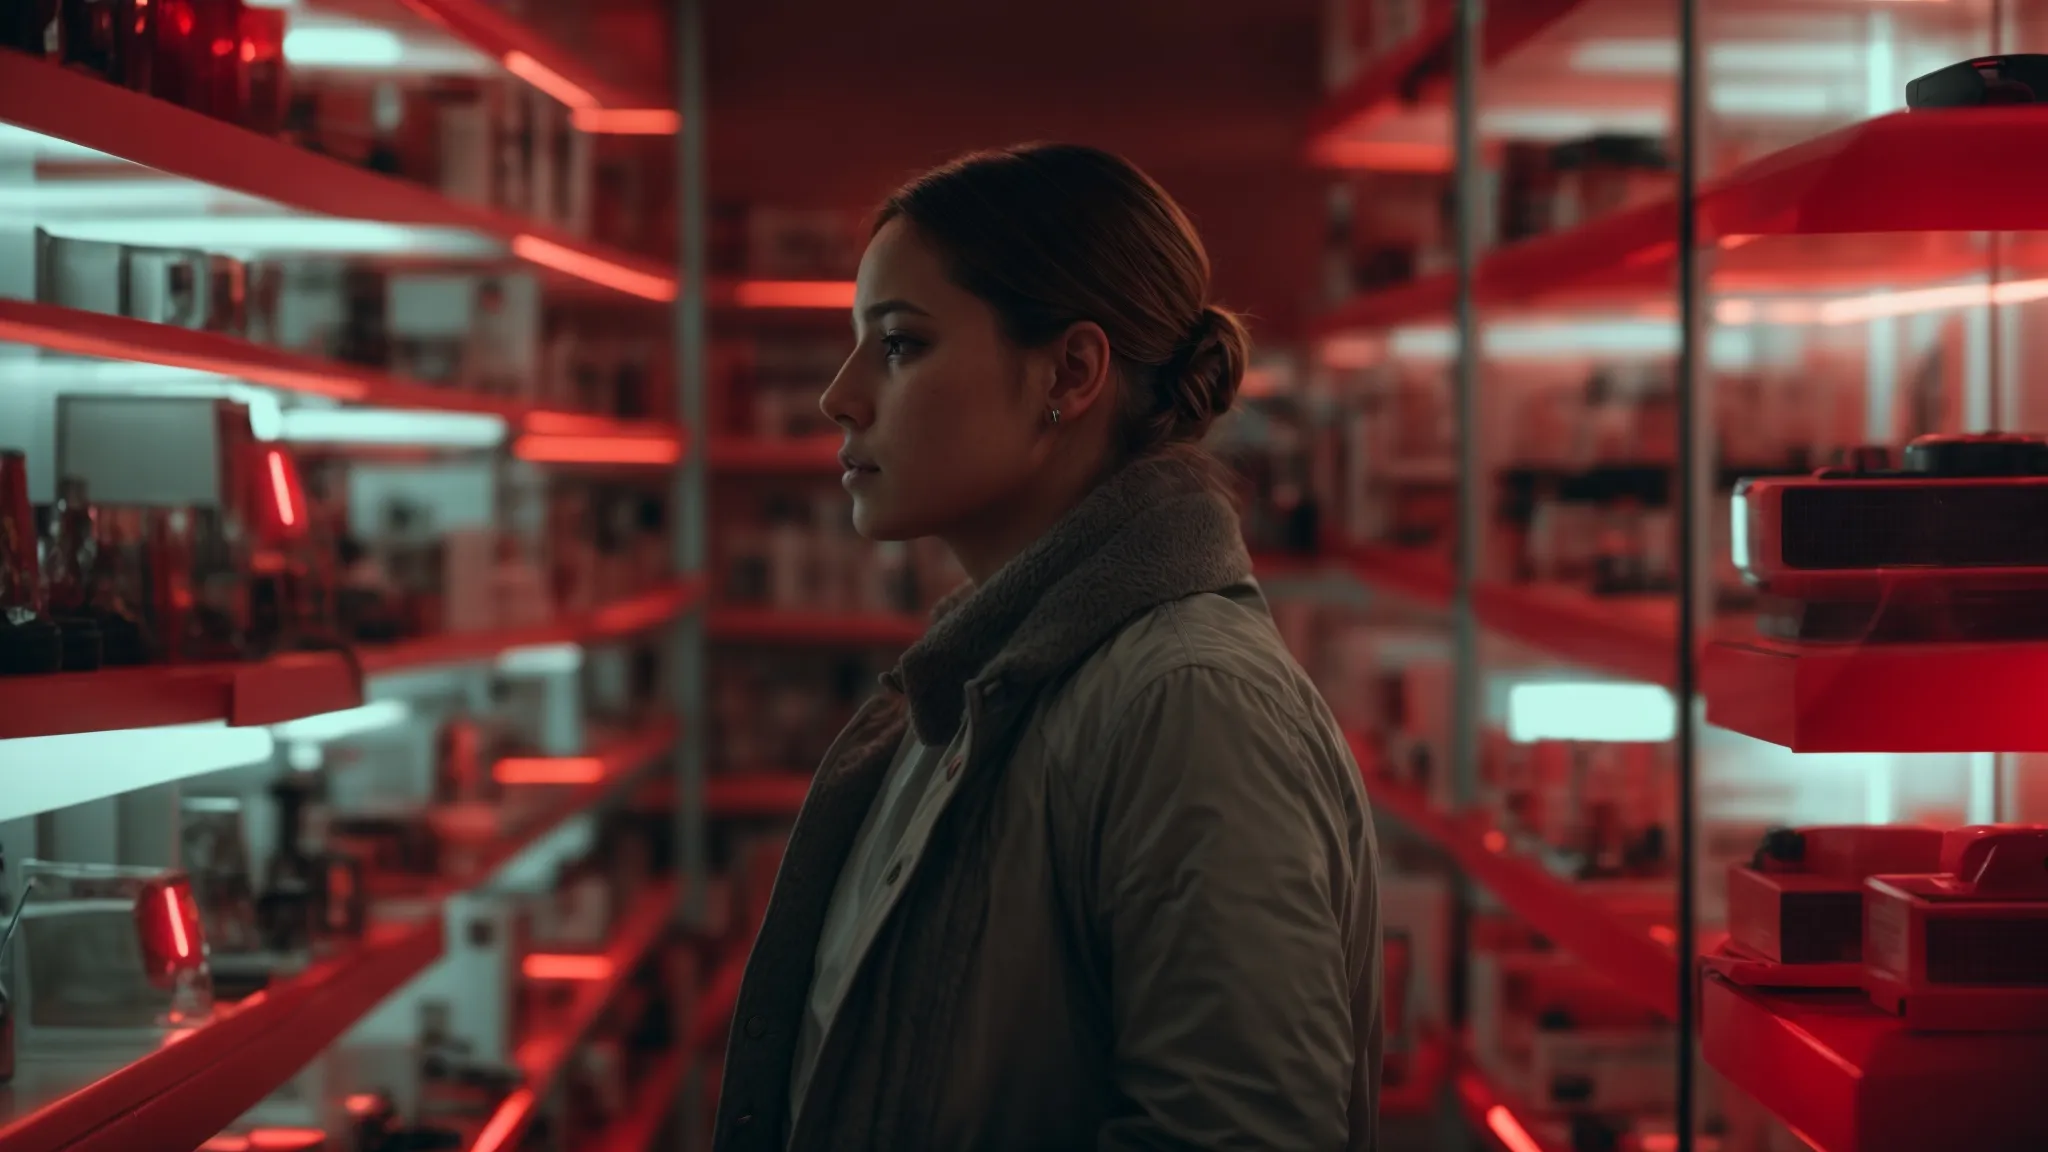 a person stands thoughtfully in front of an array of red light therapy devices displayed on shelves, pondering their options.